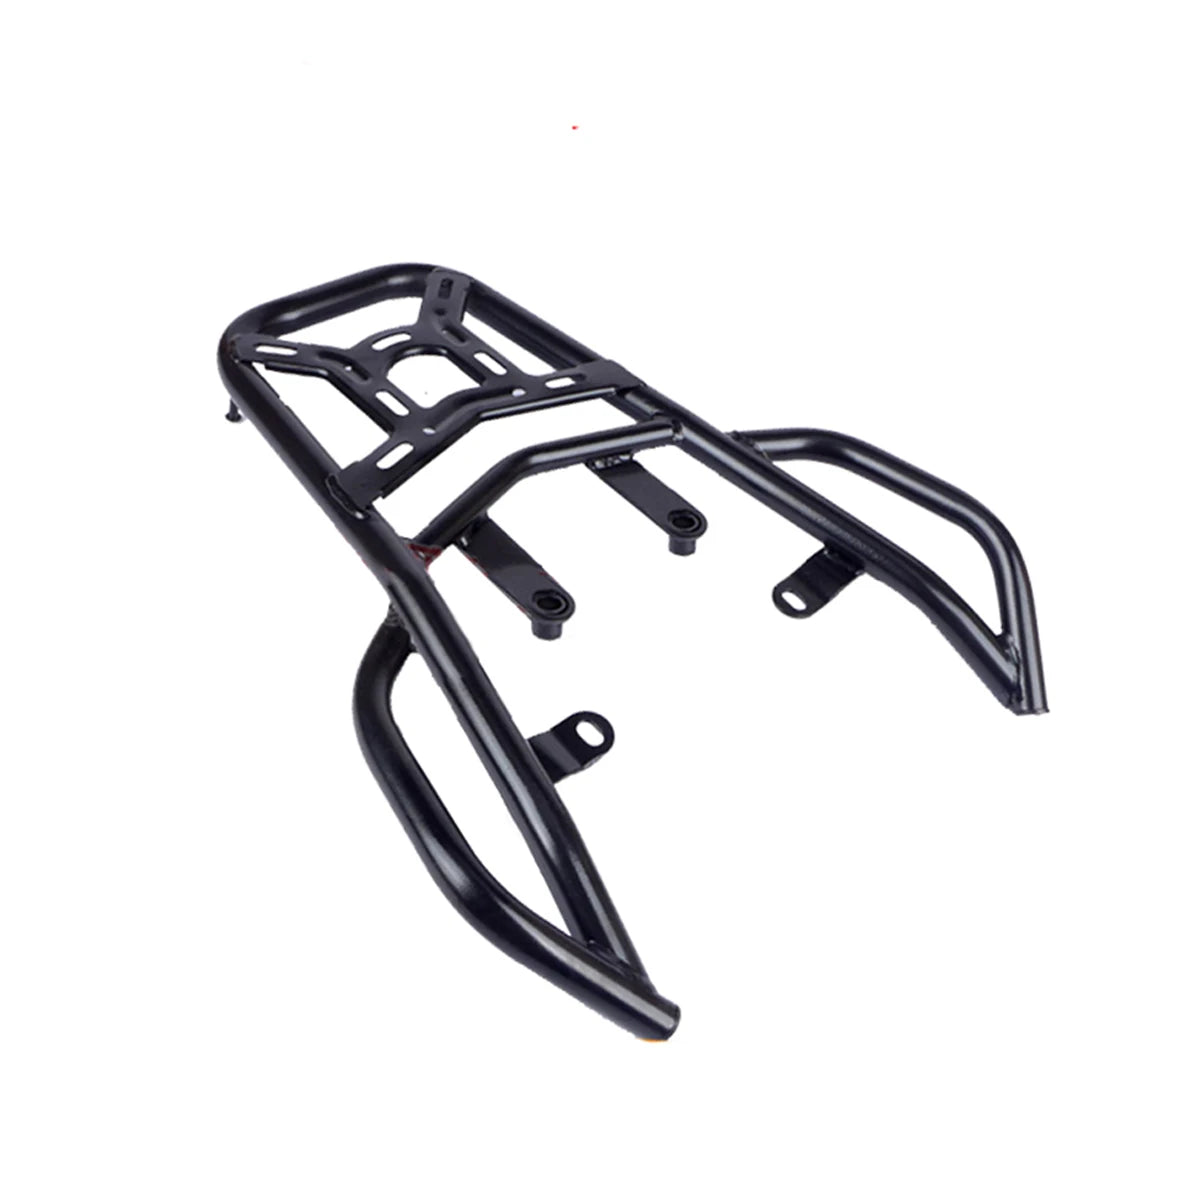 For CFMOTO CF 650MT MT650 MT 650 MT Accessories Motorcycle Rear Luggage Rack Carrier Trunk Box Holder Support Shelf Bracket Grip